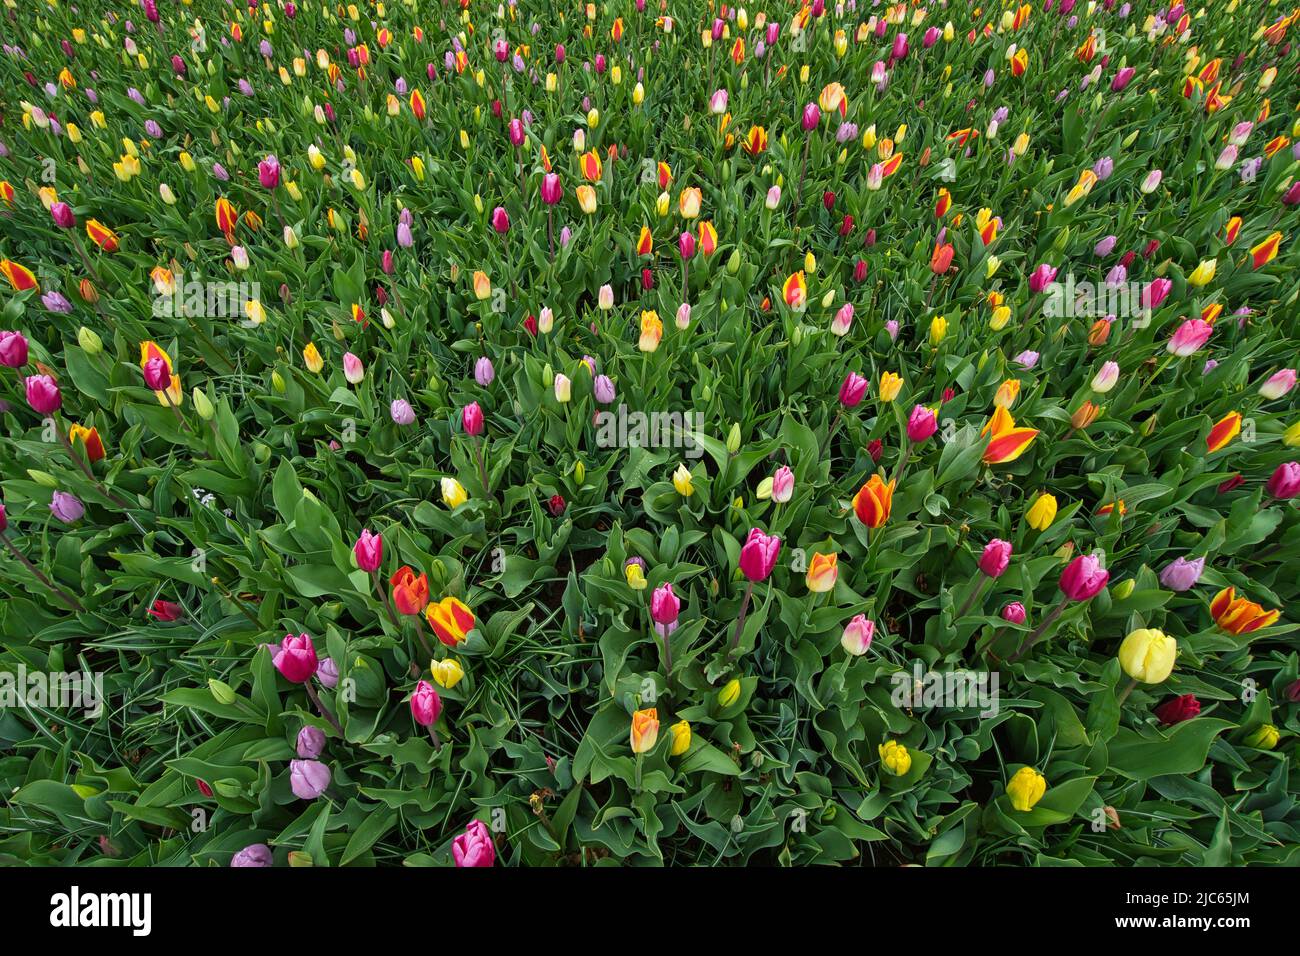 A beautiful flower field in Holland with many colorful tulips Stock Photo